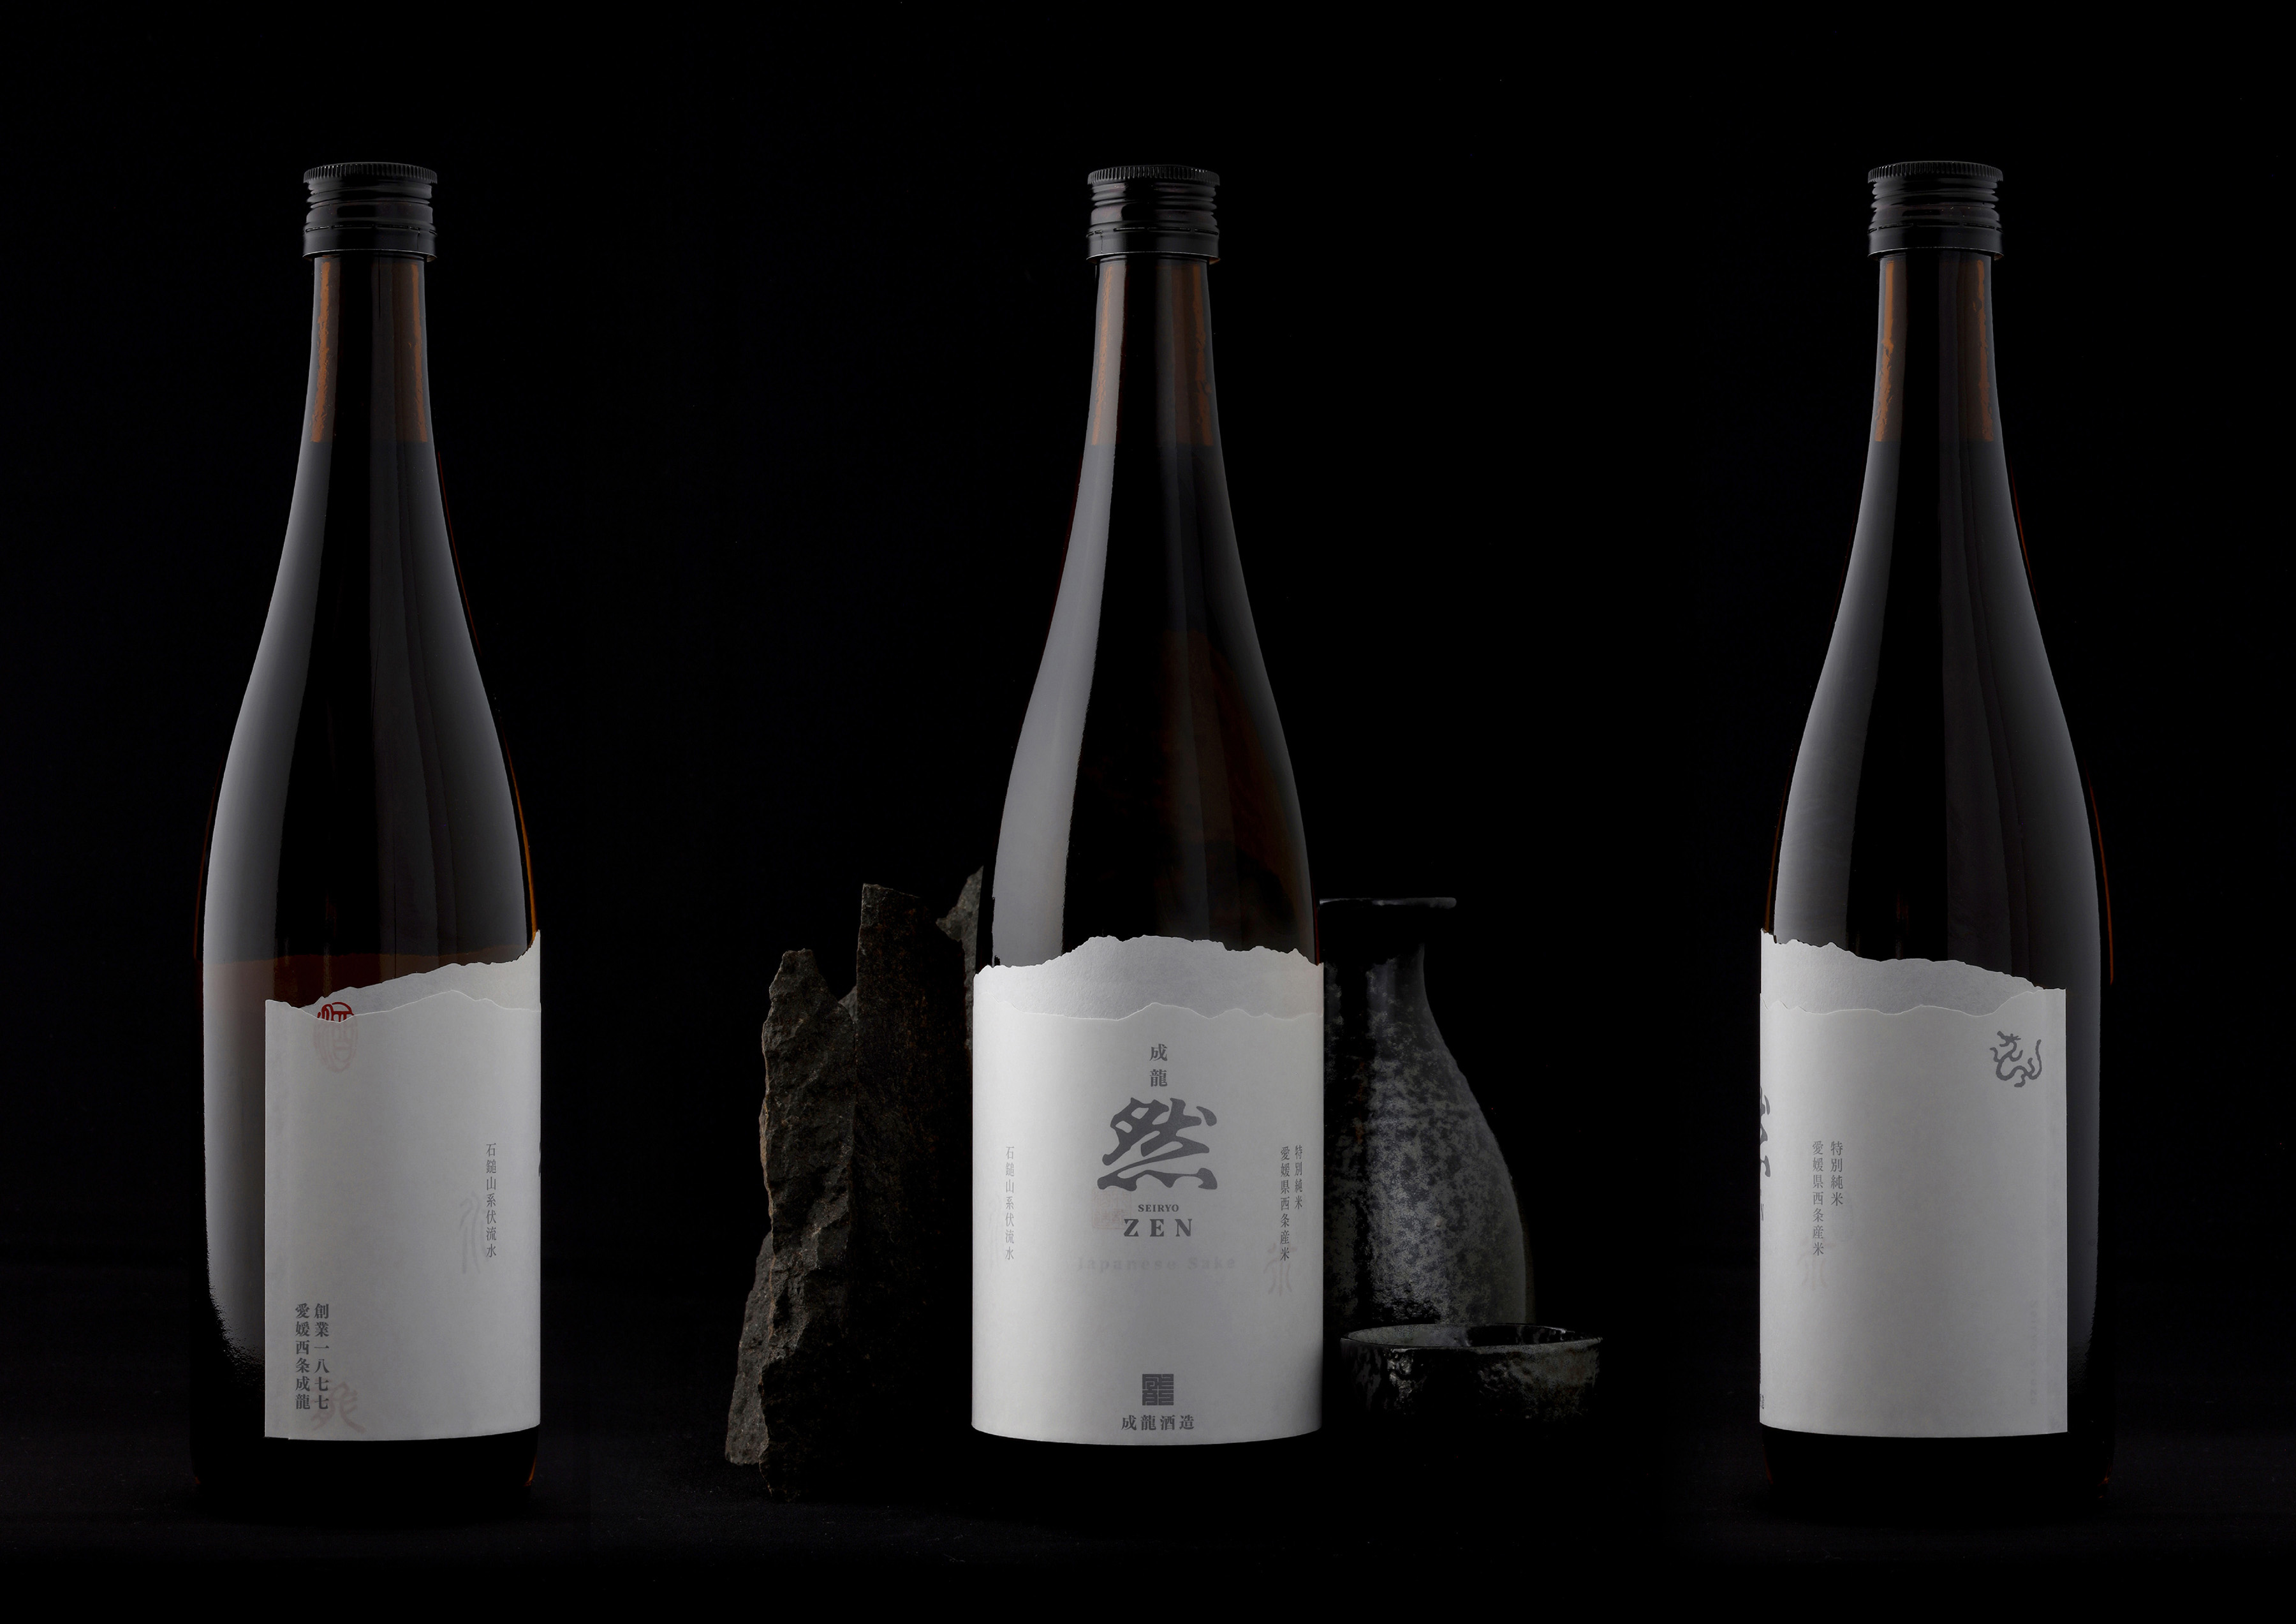 Japanese Sake Mt. Ishizuchi Motif and Label Design by Grand Deluxe